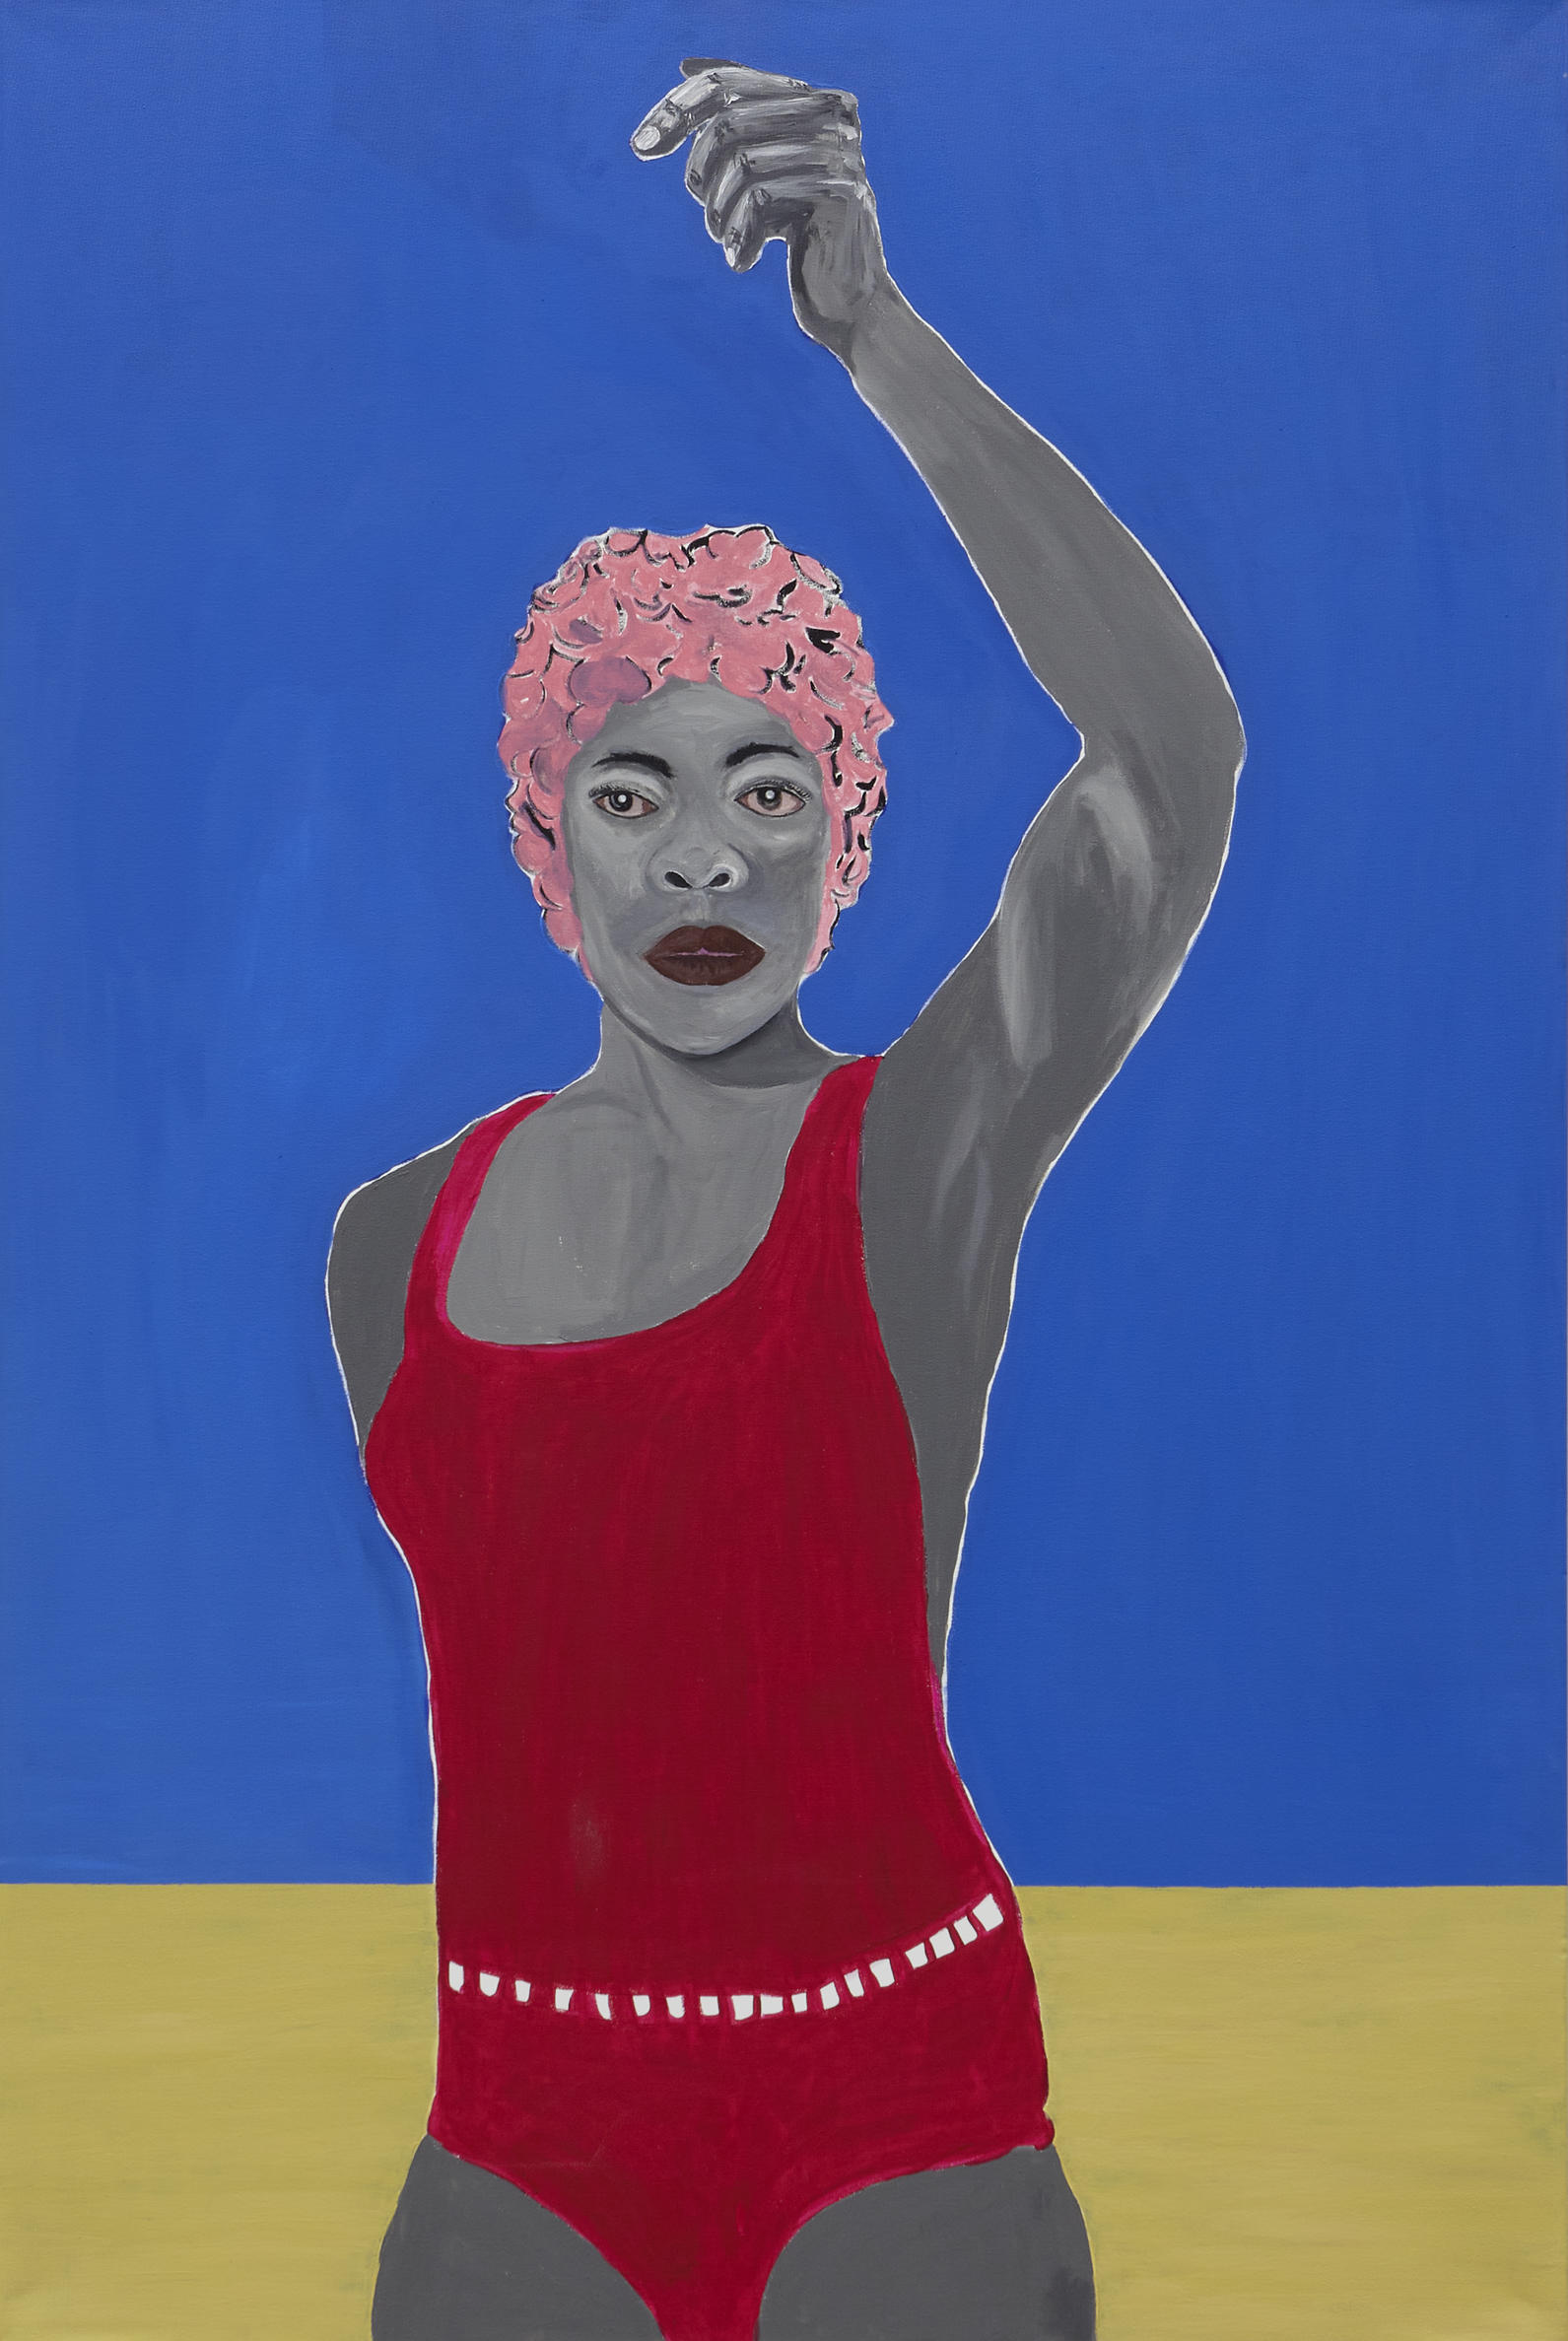 A painted image of a person in a red one piece swimsuit with a swimming cap on.